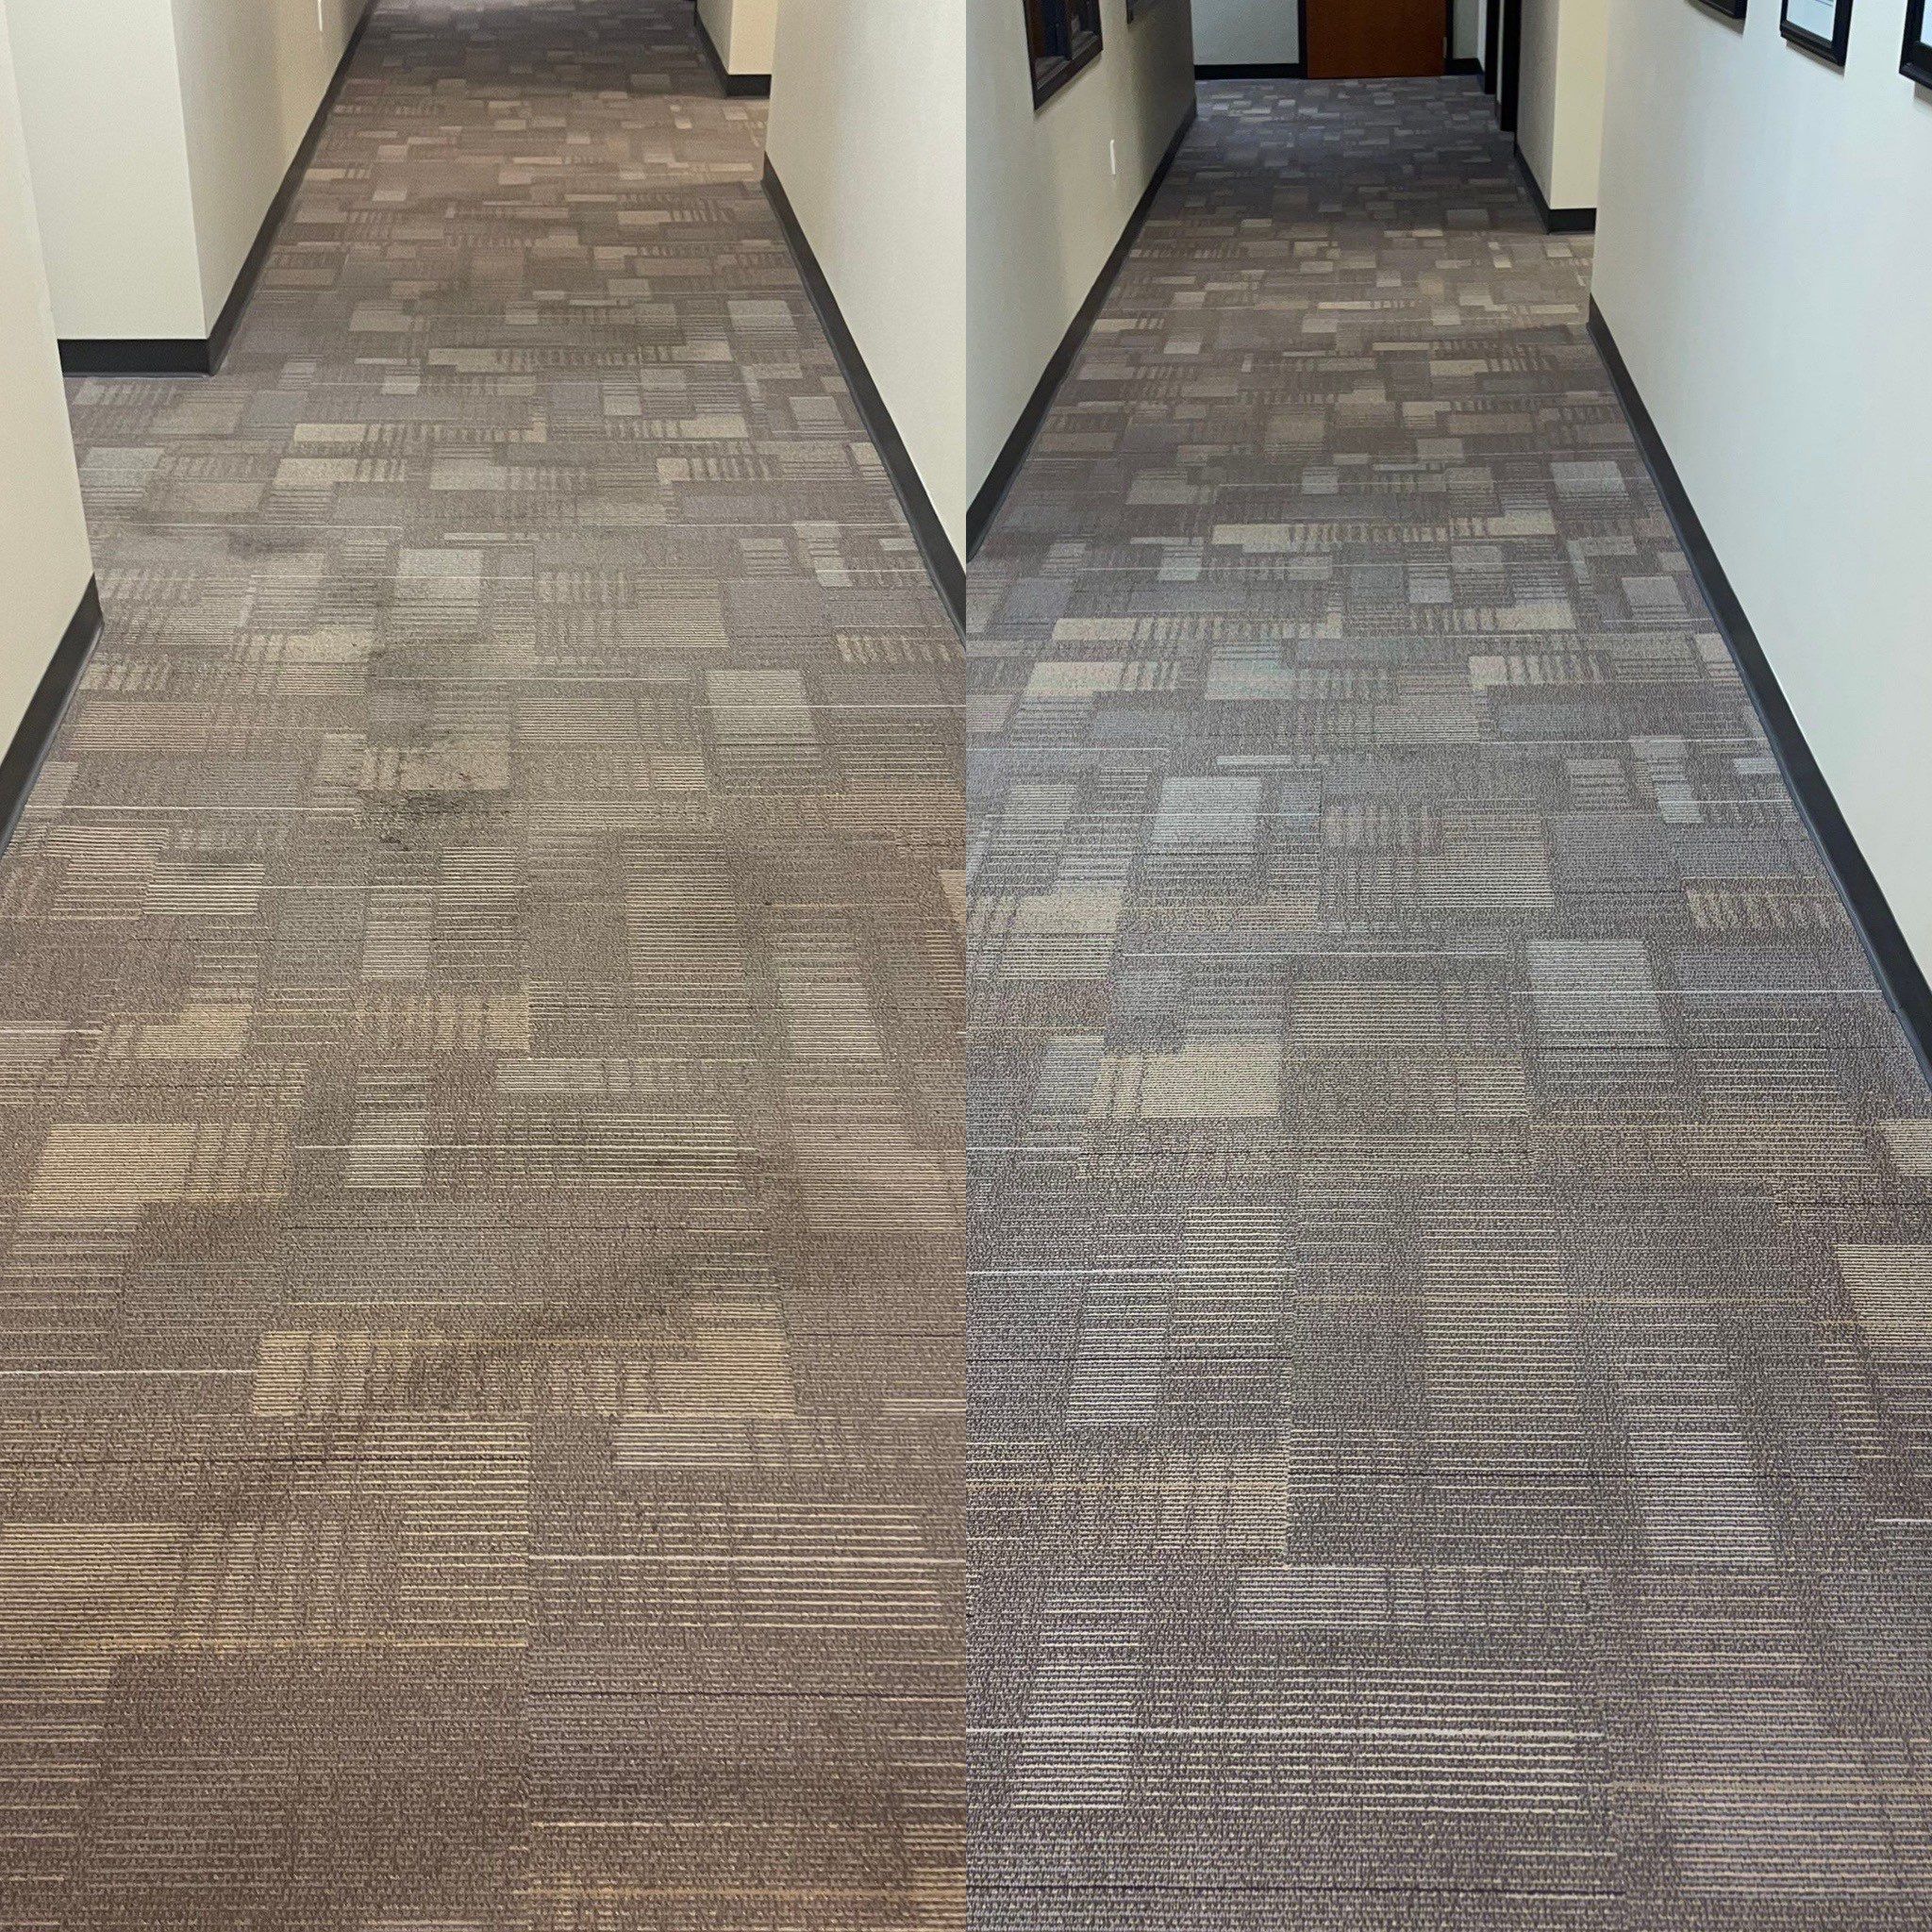 carpet cleaning service for a commercial hallway removing stains and refreshing the carpet appearance